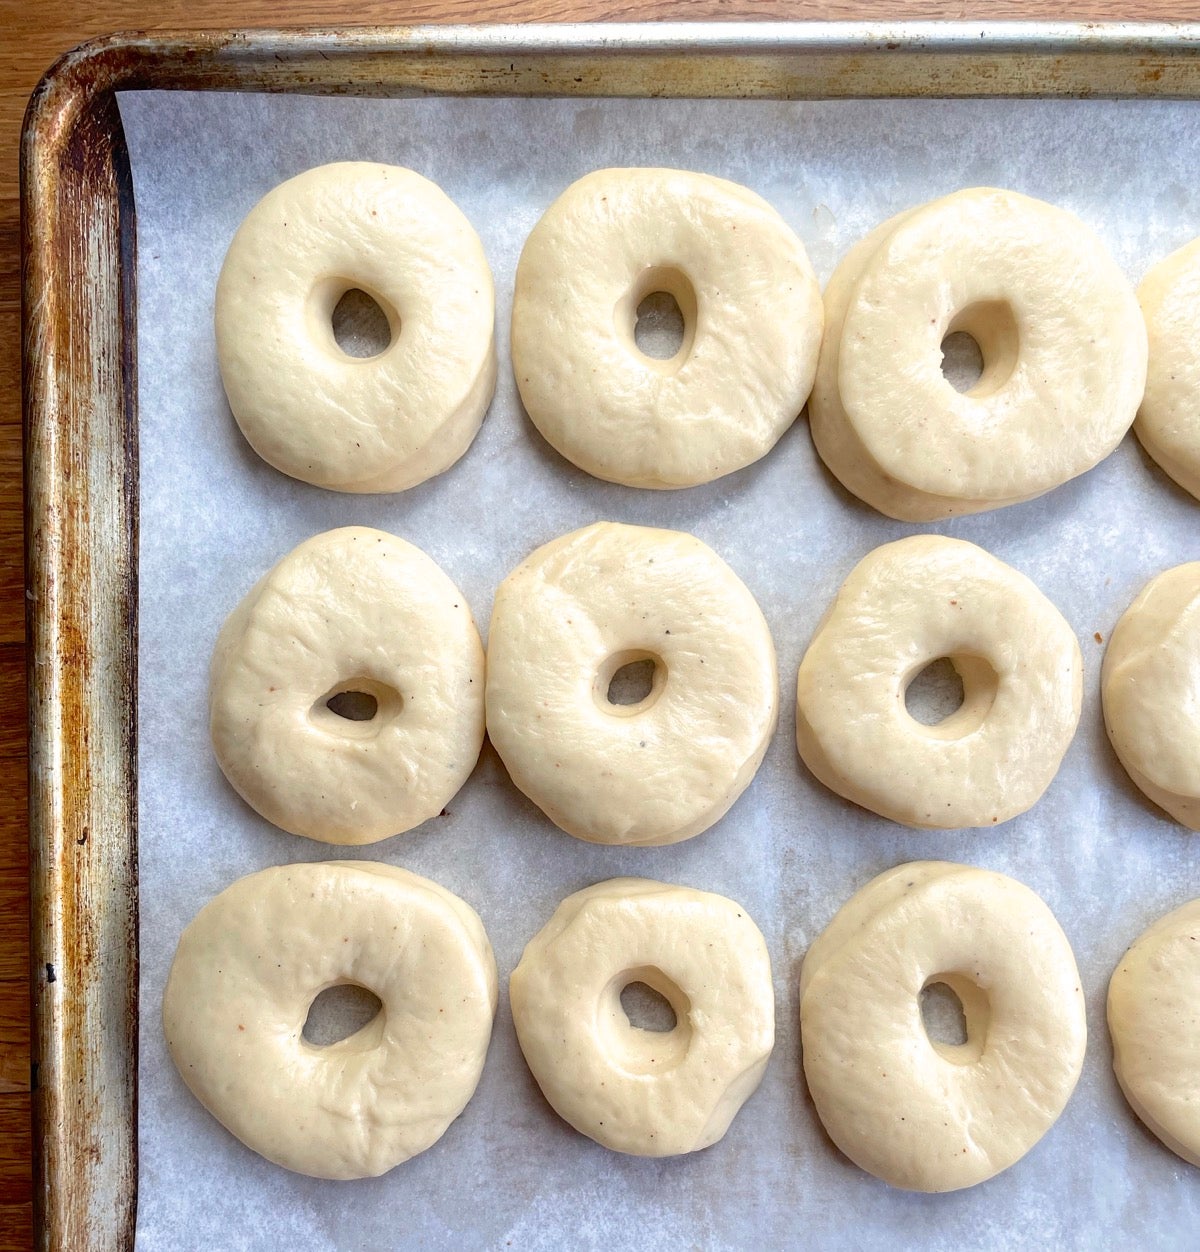 Risen yeast doughnuts on a parchment-lined baking sheet, ready to be fried.